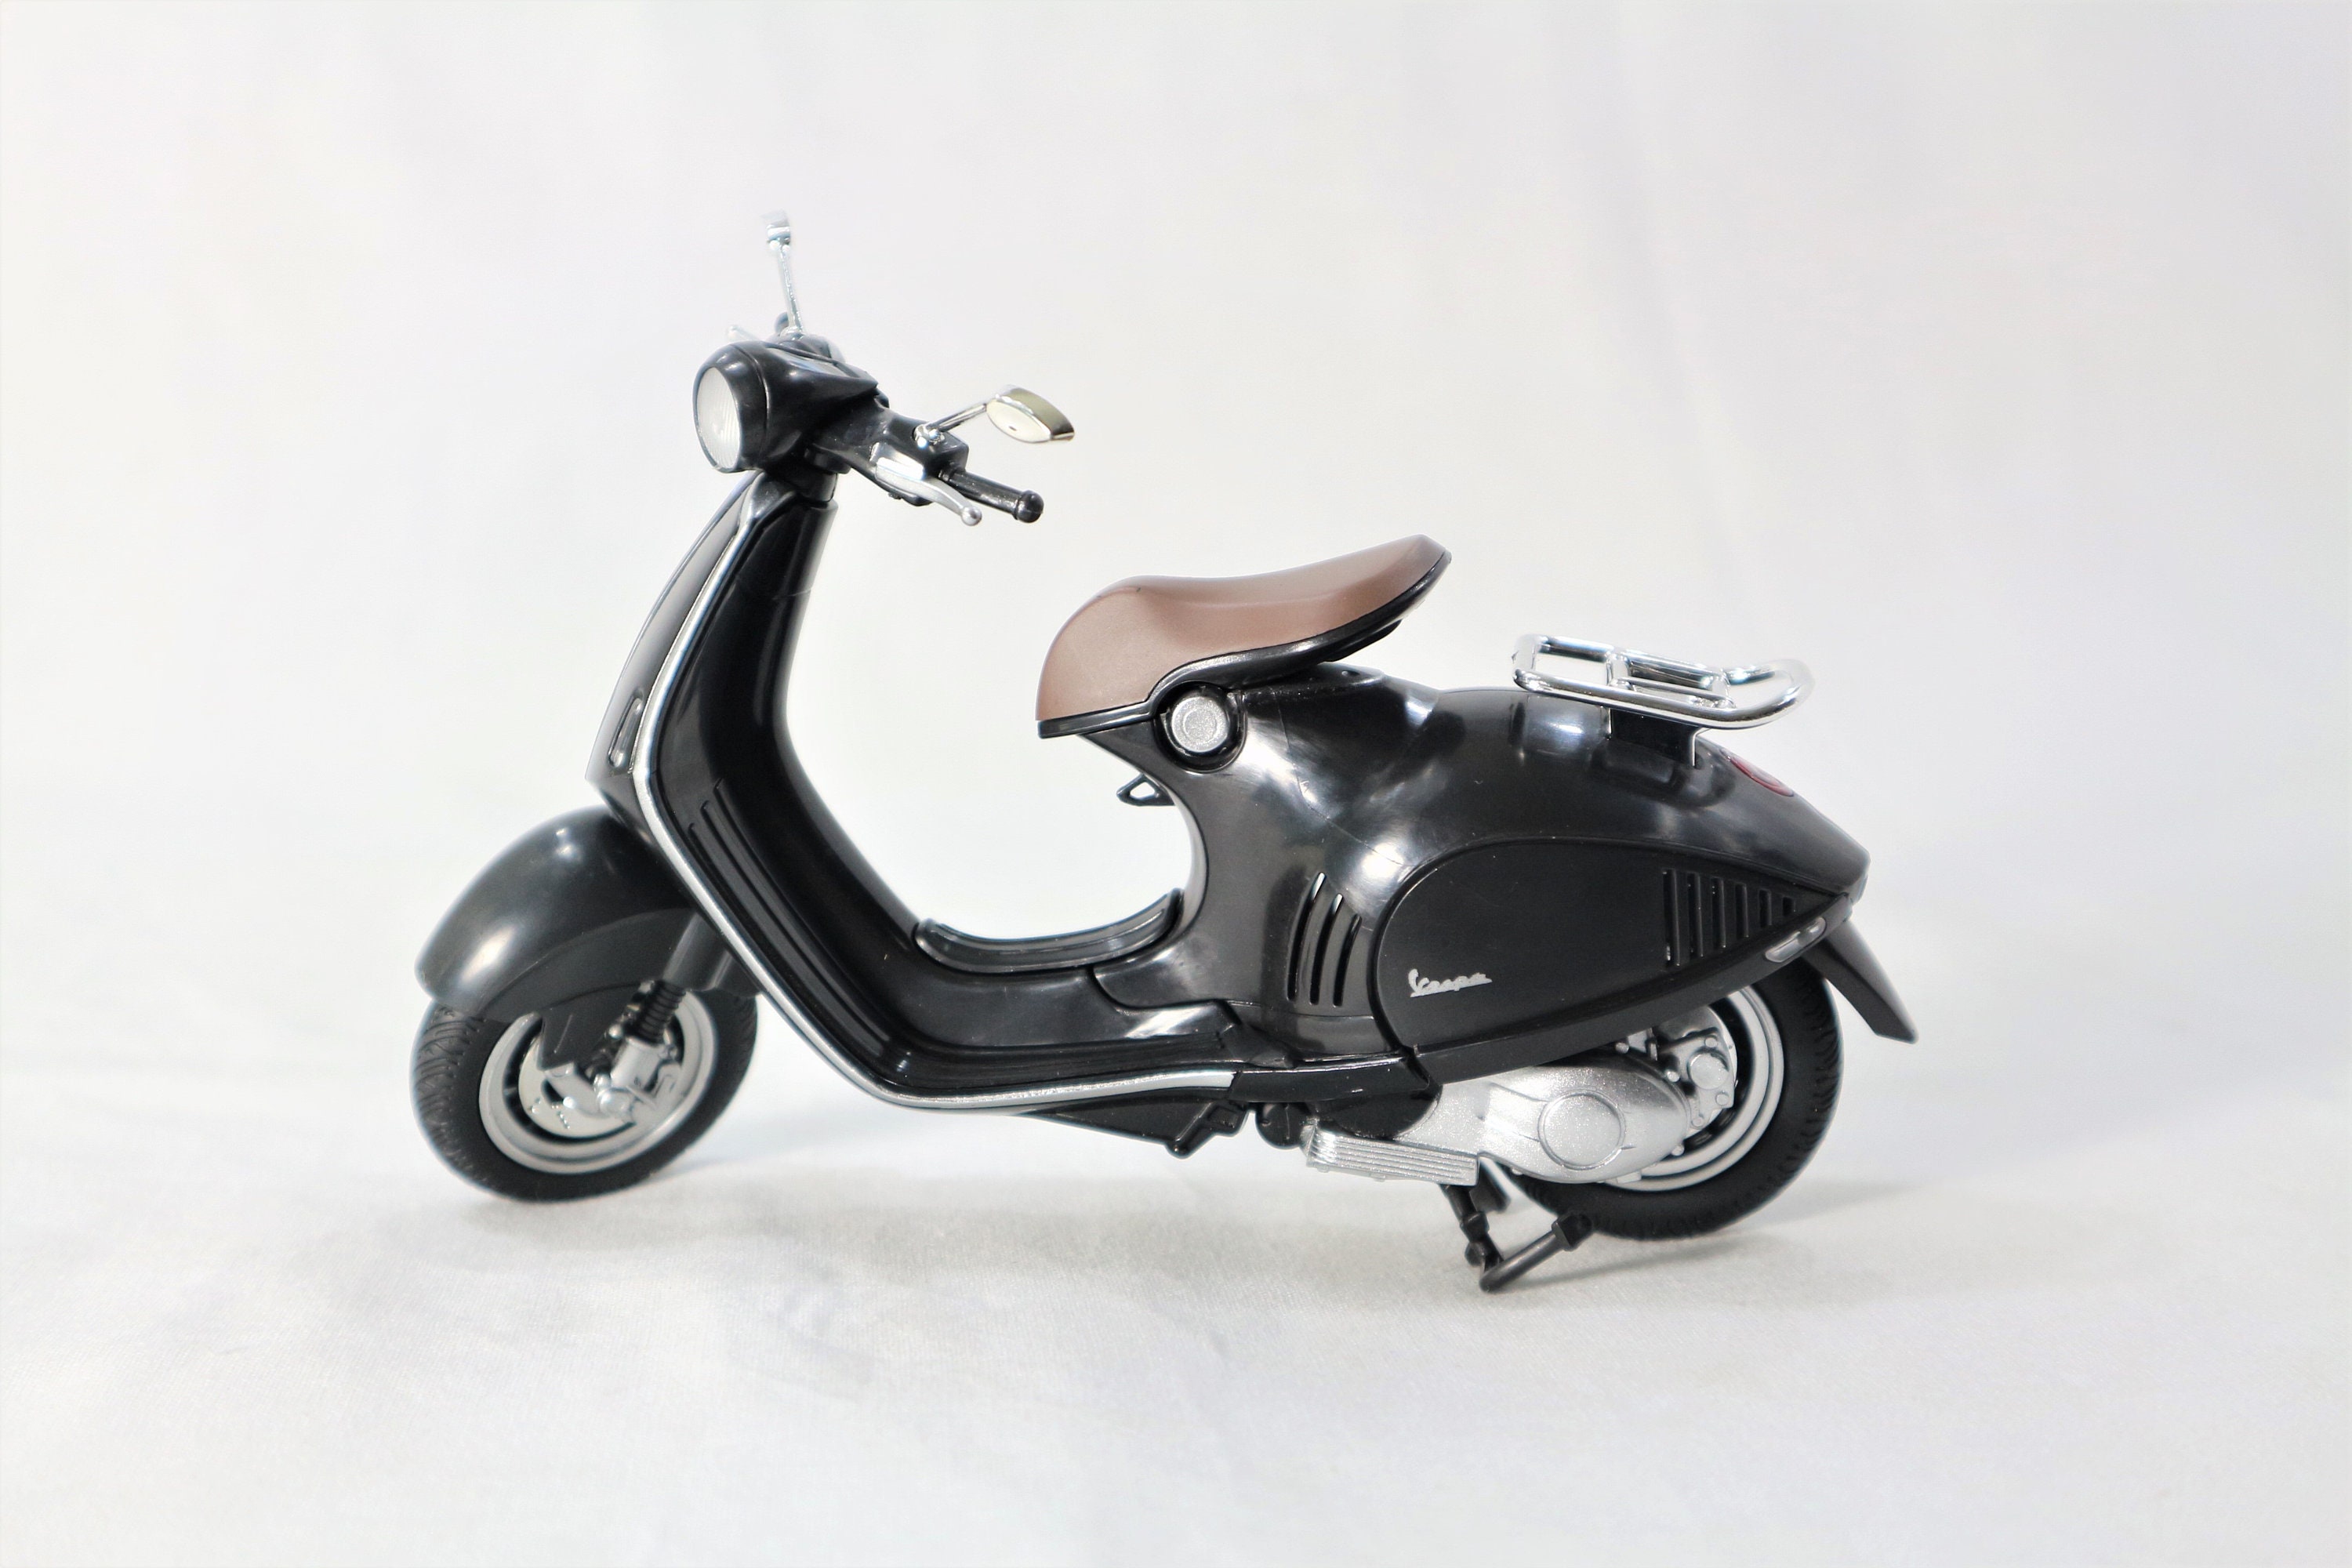 946 For Sale - Vespa Motorcycles - Cycle Trader